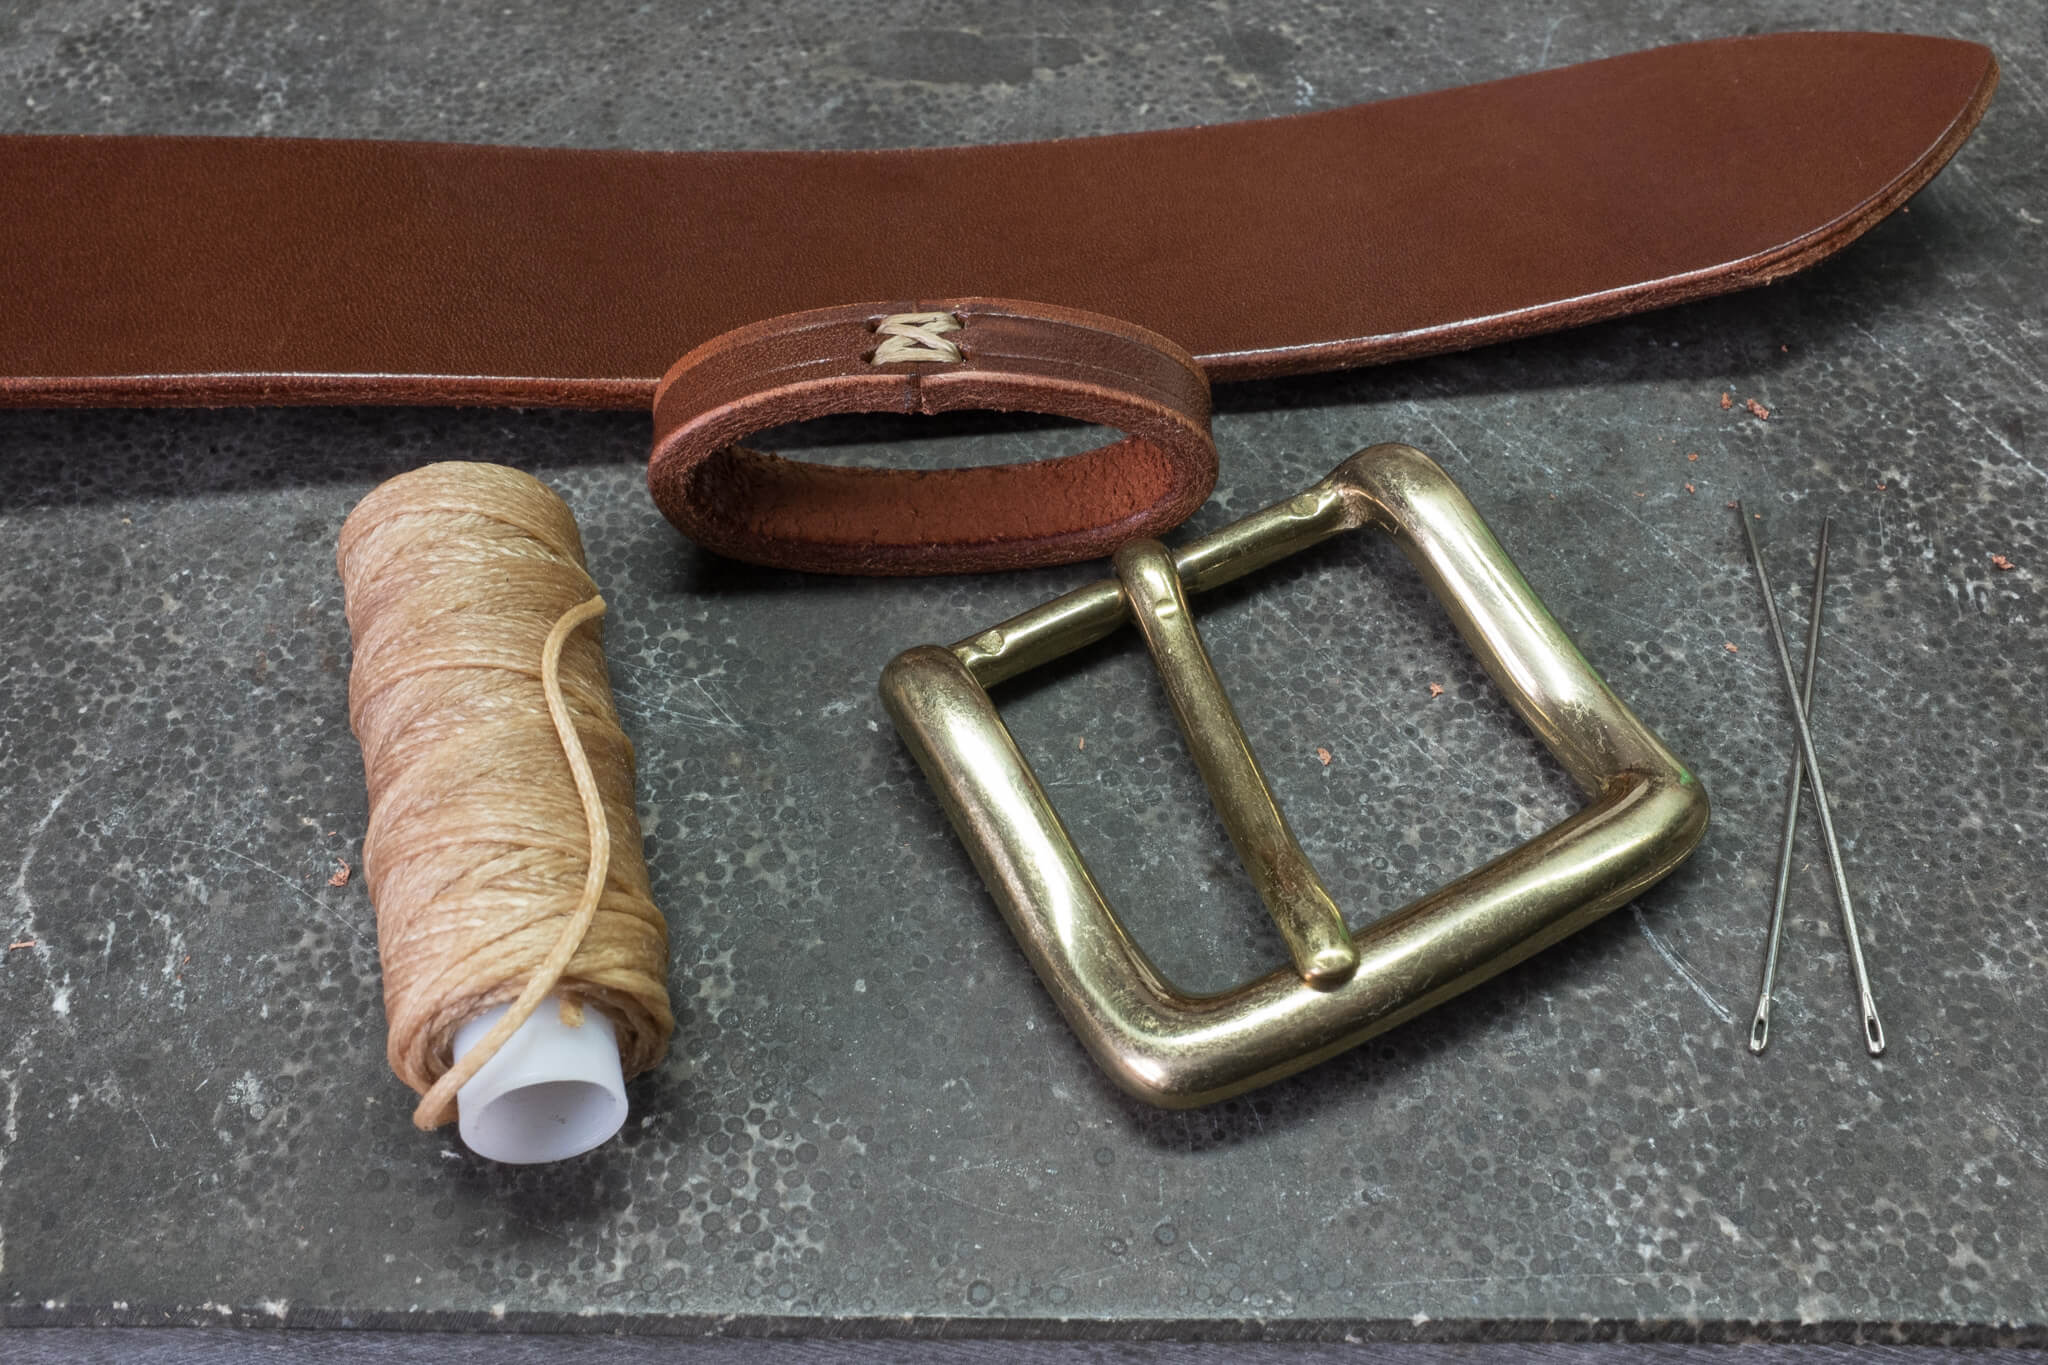 Solid brass buckle will complete this belt.